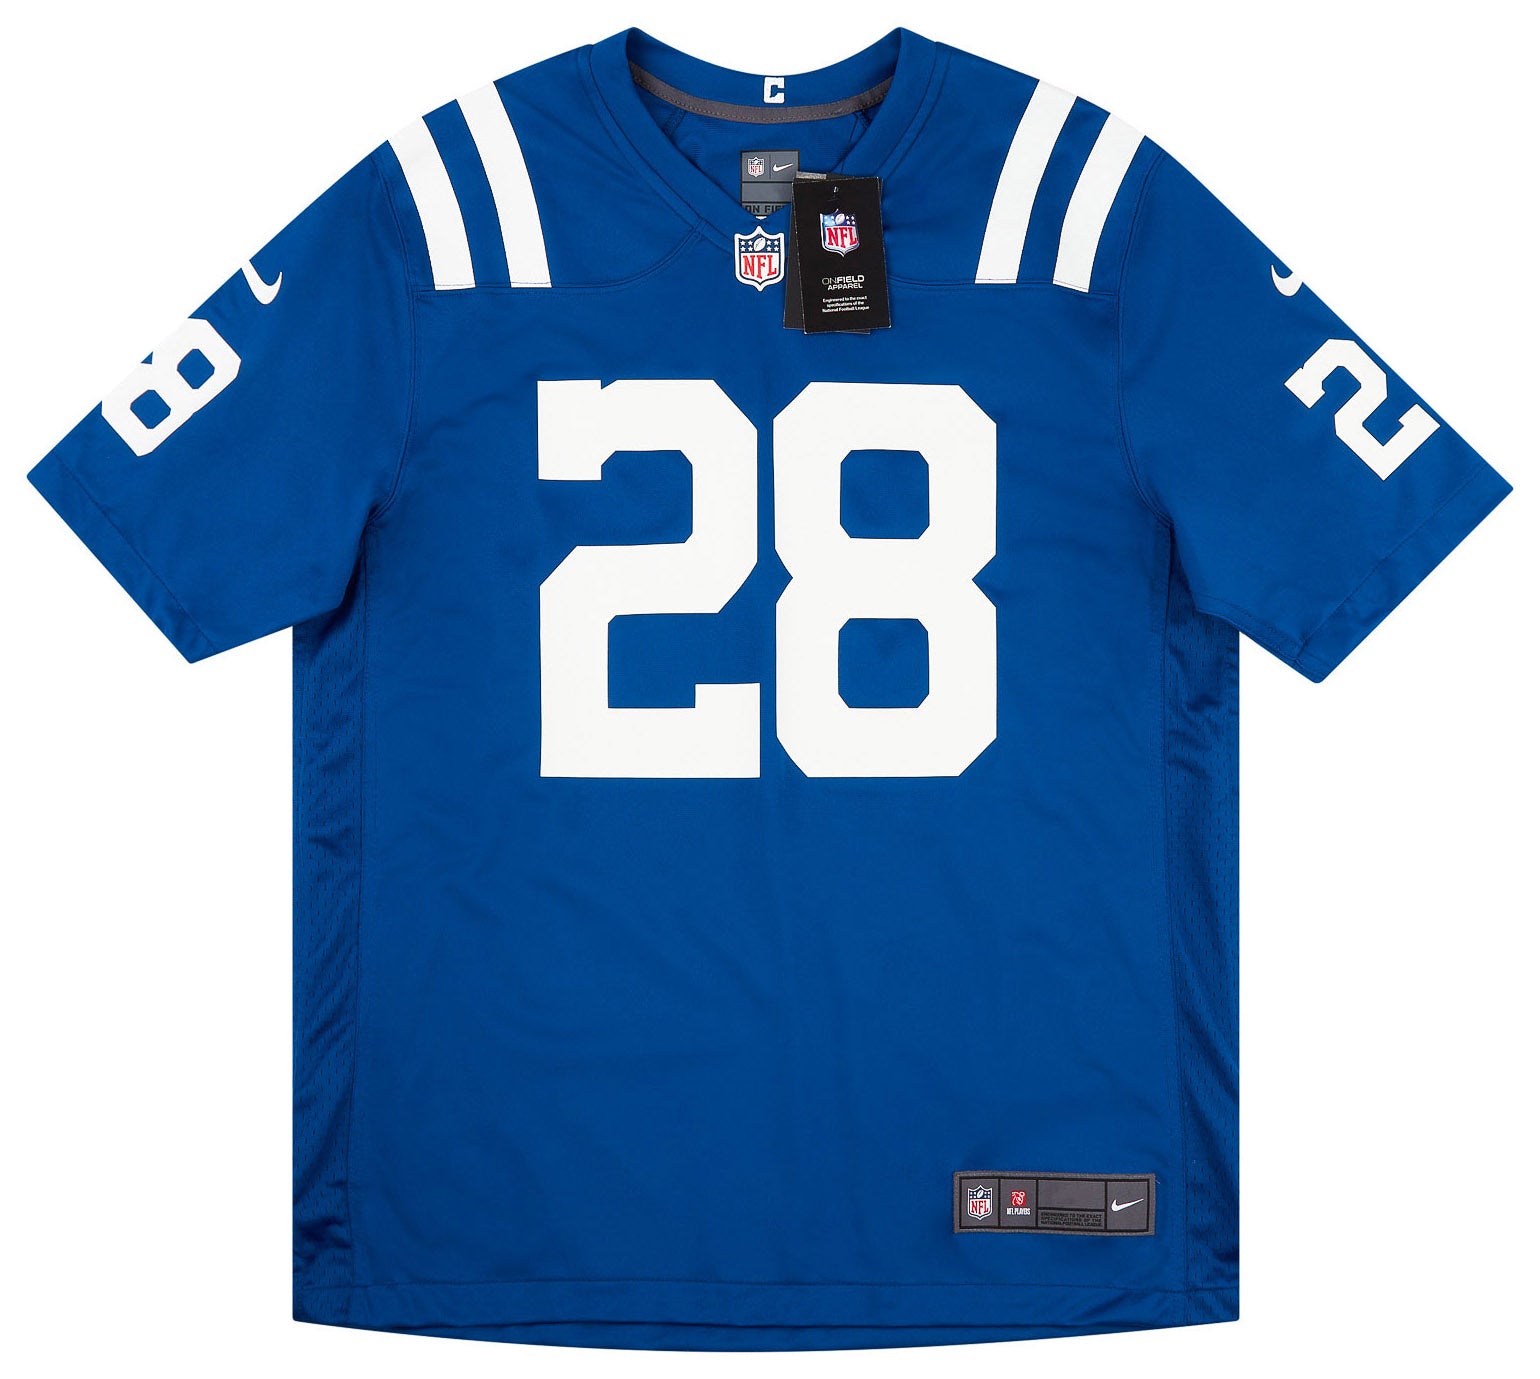 2020-22 INDIANAPOLIS COLTS TAYLOR #28 NIKE GAME JERSEY (HOME) L - W/TAGS